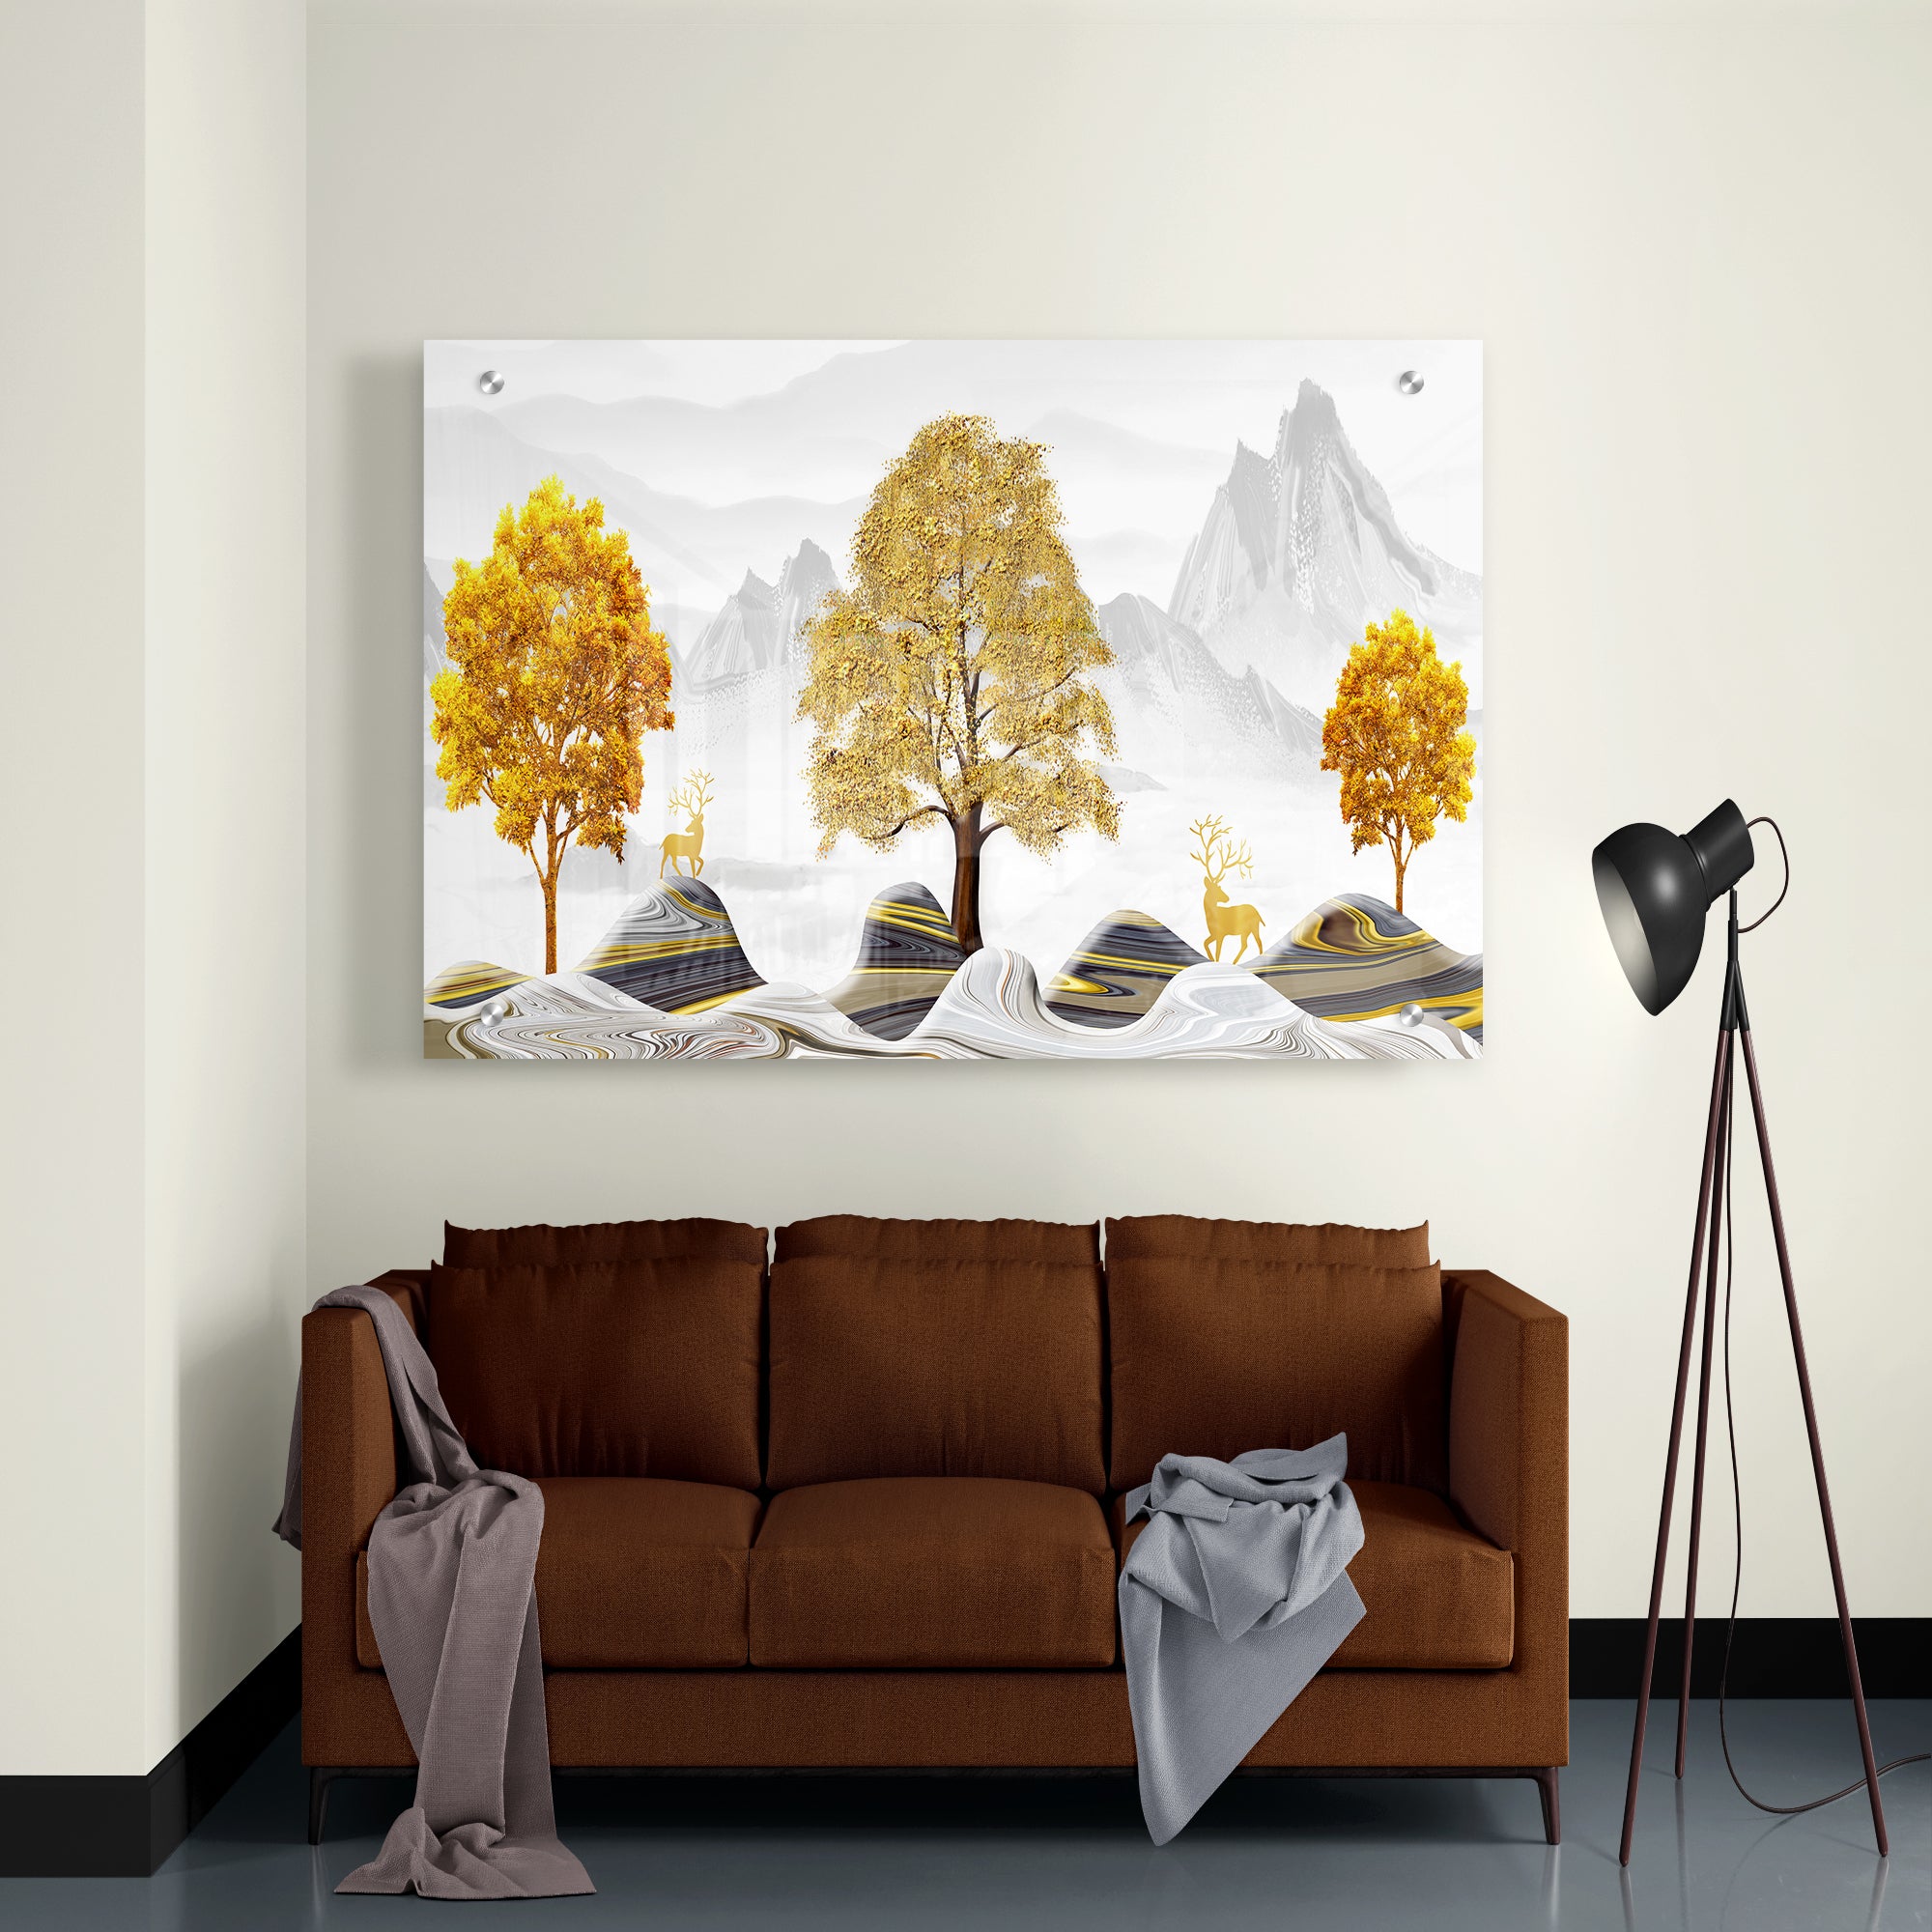 Colorful Rocks And Golden Tree With Deers Acrylic Wall Painting